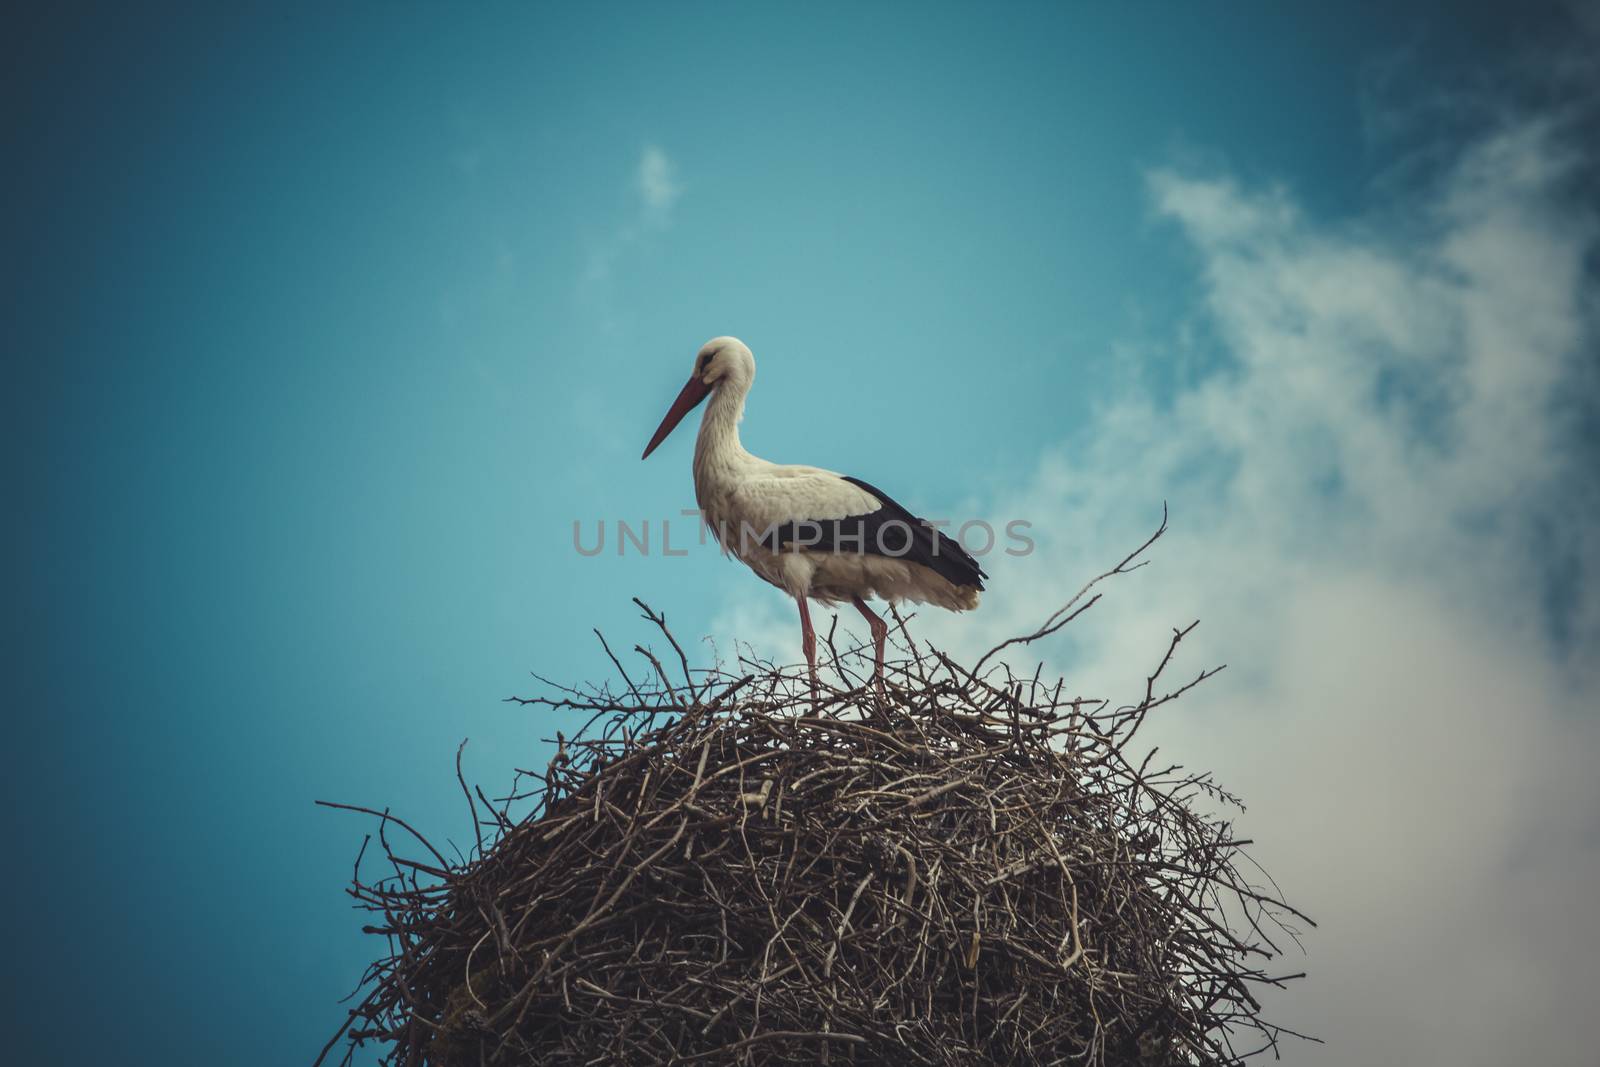 Wildlife, Stork nest made ������of tree branches over blue sky in dramatic